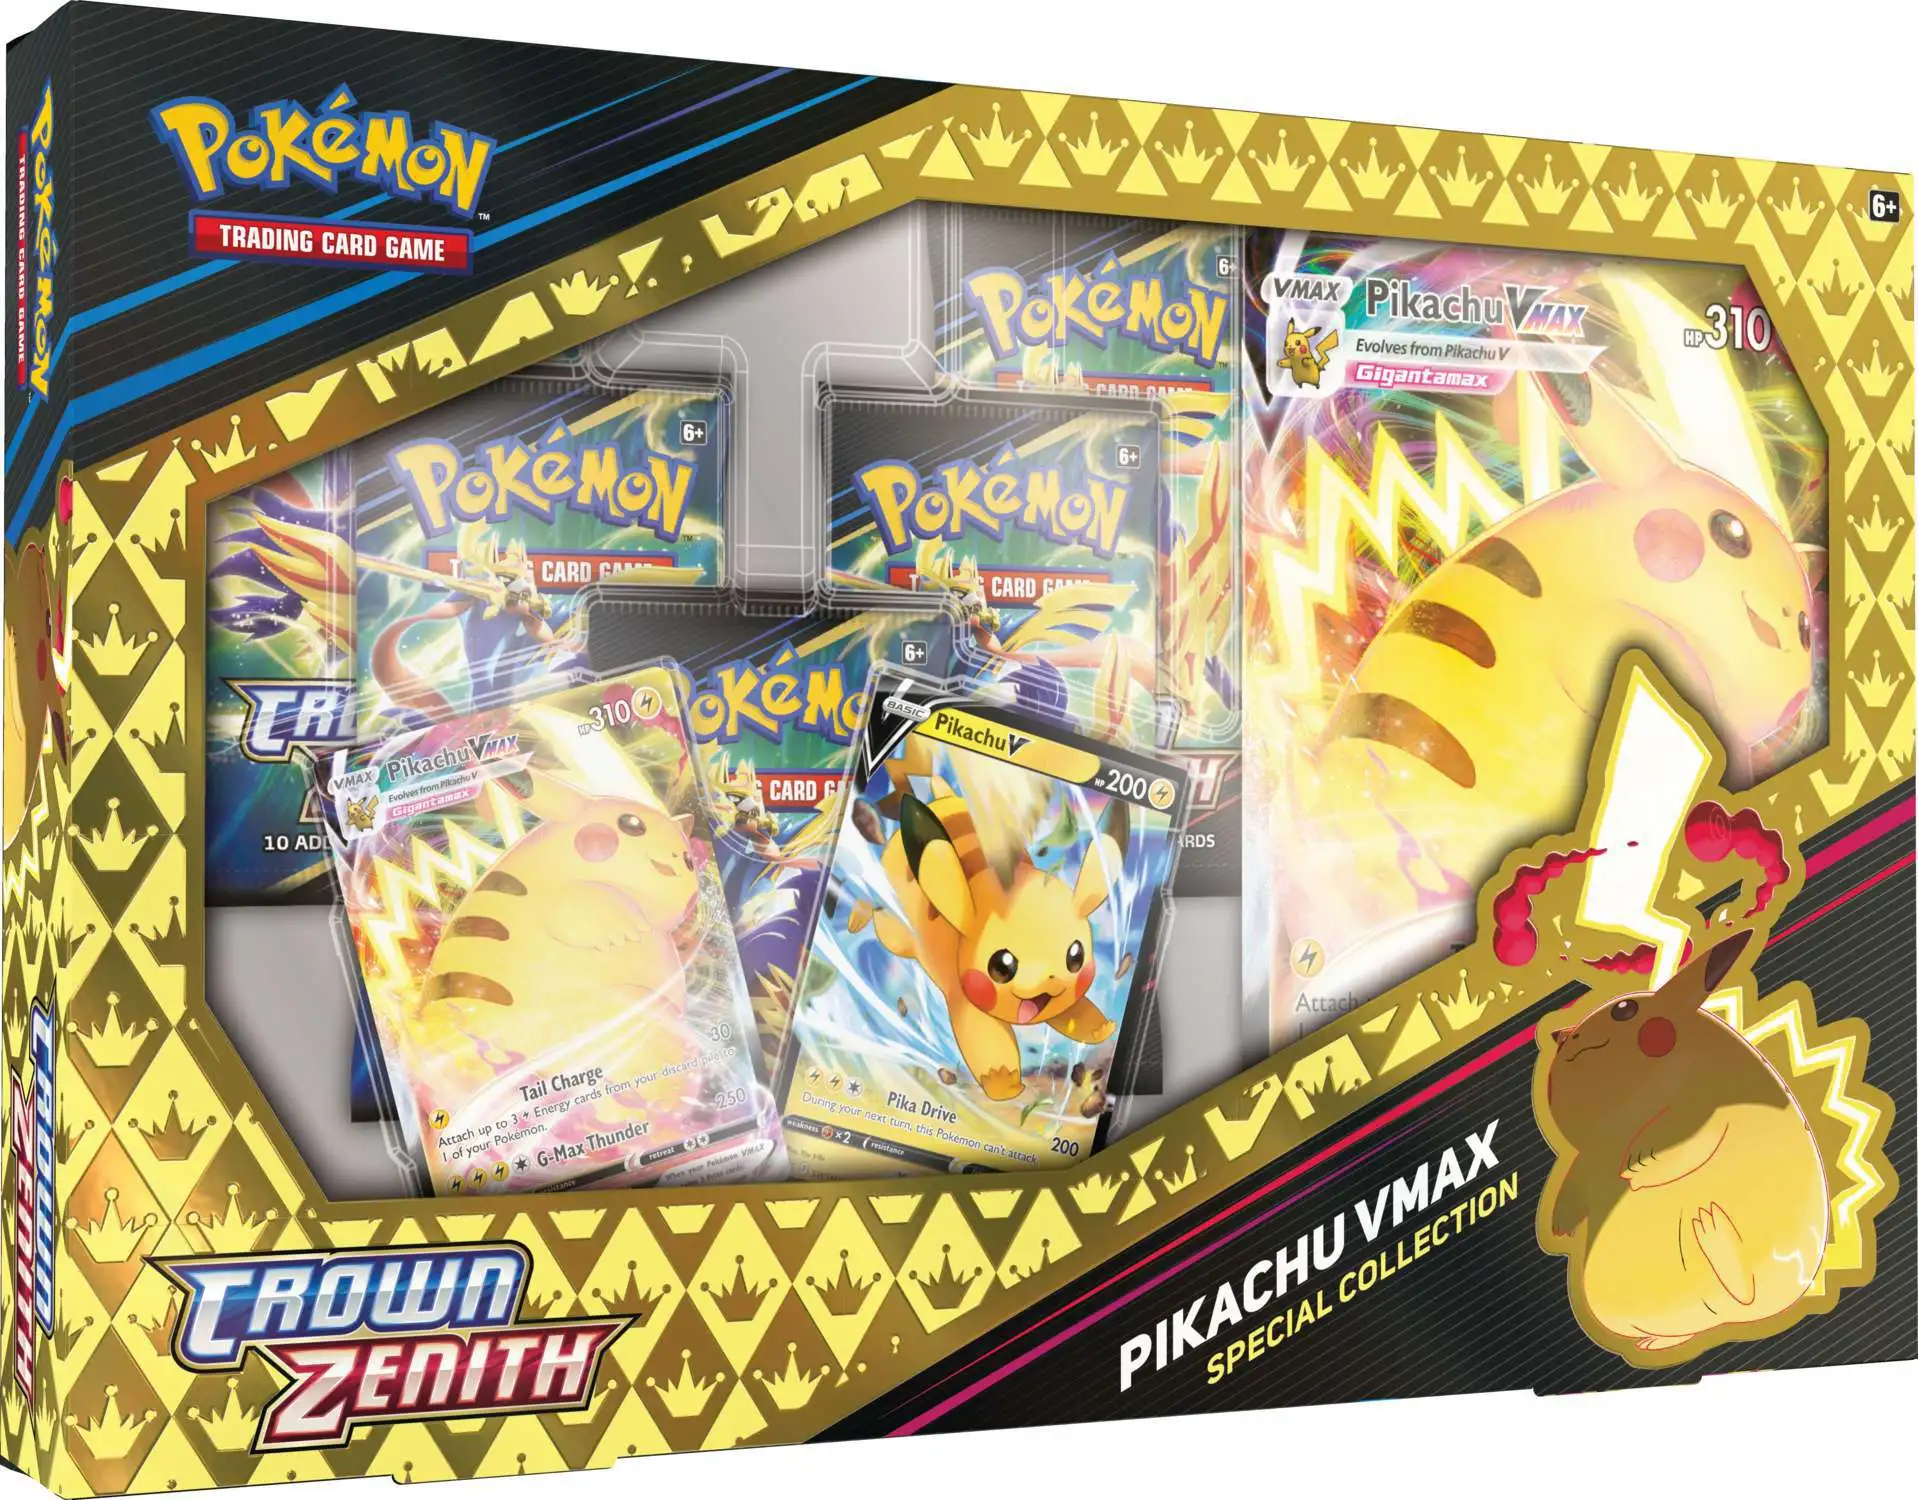 Pokemon Trading Card Game Crown Zenith Pikachu VMAX Special Collection Box  5 Booster Packs, 2 Foil Promo Cards, Oversized Card More Pokemon USA -  ToyWiz